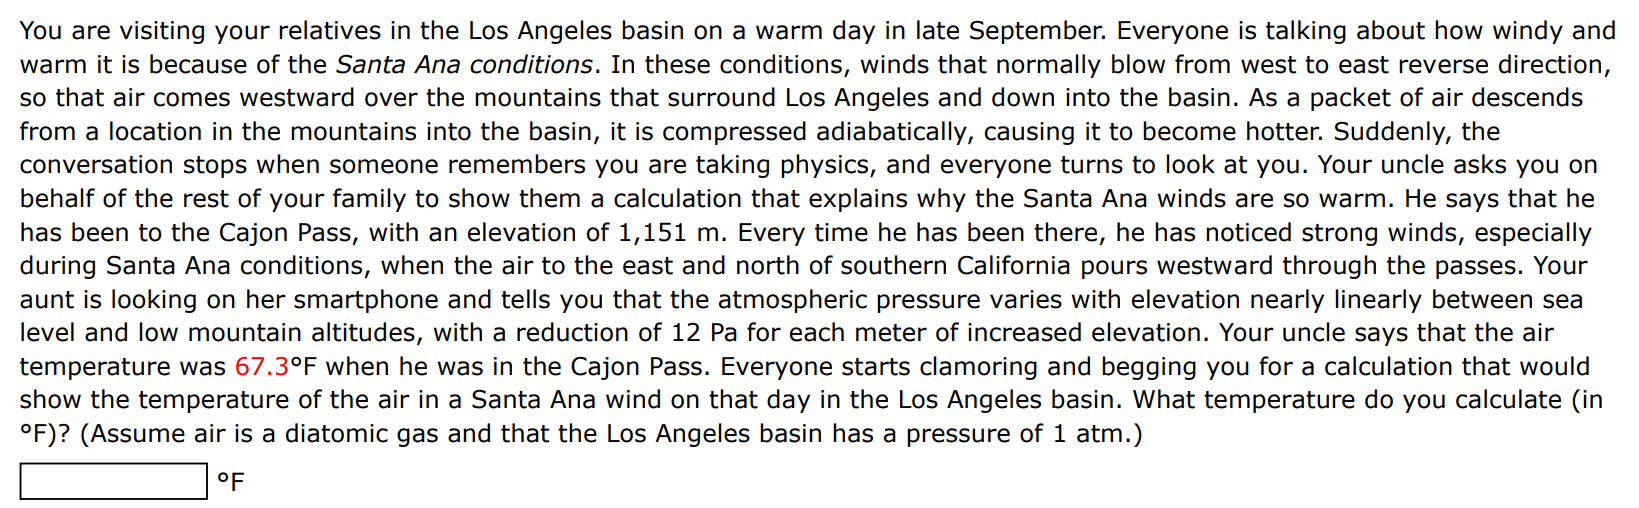 You are visiting your relatives in the Los Angeles basin on a warm day in late September. Everyone is talking about how windy and warm it is because of the Santa Ana conditions. In these conditions, winds that normally blow from west to east reverse direction, so that air comes westward over the mountains that surround Los Angeles and down into the basin. As a packet of air descends from a location in the mountains into the basin, it is compressed adiabatically, causing it to become hotter. Suddenly, the conversation stops when someone remembers you are taking physics, and everyone turns to look at you. Your uncle asks you on behalf of the rest of your family to show them a calculation that explains why the Santa Ana winds are so warm. He says that he has been to the Cajon Pass, with an elevation of 1,151 m. Every time he has been there, he has noticed strong winds, especially during Santa Ana conditions, when the air to the east and north of southern California pours westward through the passes. Your aunt is looking on her smartphone and tells you that the atmospheric pressure varies with elevation nearly linearly between sea level and low mountain altitudes, with a reduction of 12 Pa for each meter of increased elevation. Your uncle says that the air temperature was 67.3∘F when he was in the Cajon Pass. Everyone starts clamoring and begging you for a calculation that would show the temperature of the air in a Santa Ana wind on that day in the Los Angeles basin. What temperature do you calculate (in ∘F) ? (Assume air is a diatomic gas and that the Los Angeles basin has a pressure of 1 atm. ) ∘F 